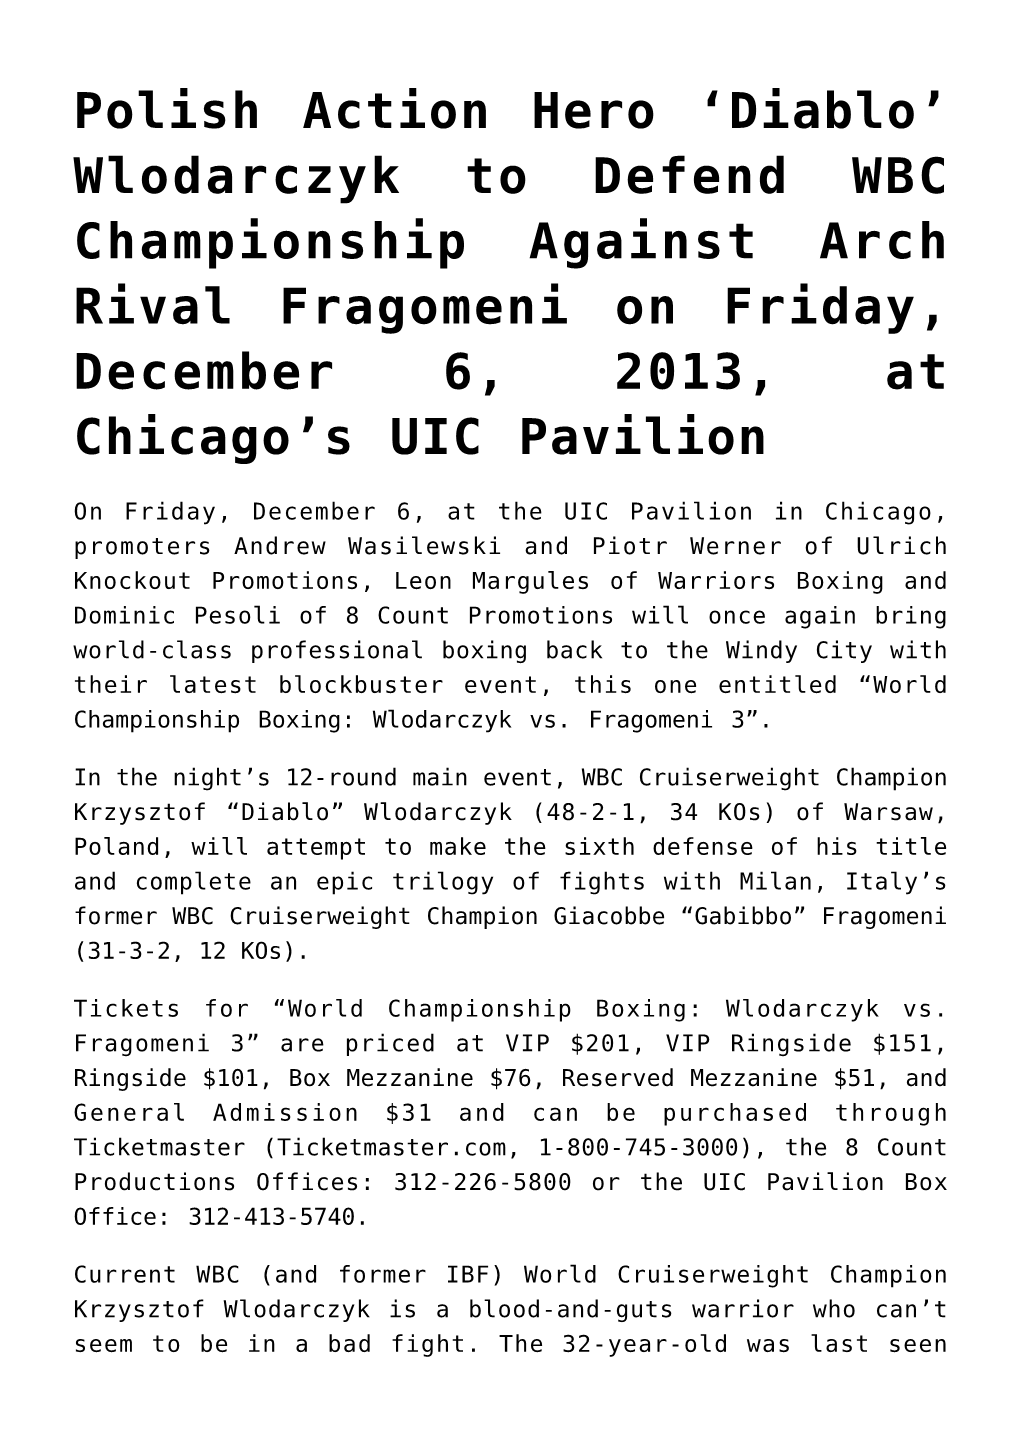 Wlodarczyk to Defend WBC Championship Against Arch Rival Fragomeni on Friday, December 6, 2013, at Chicago’S UIC Pavilion